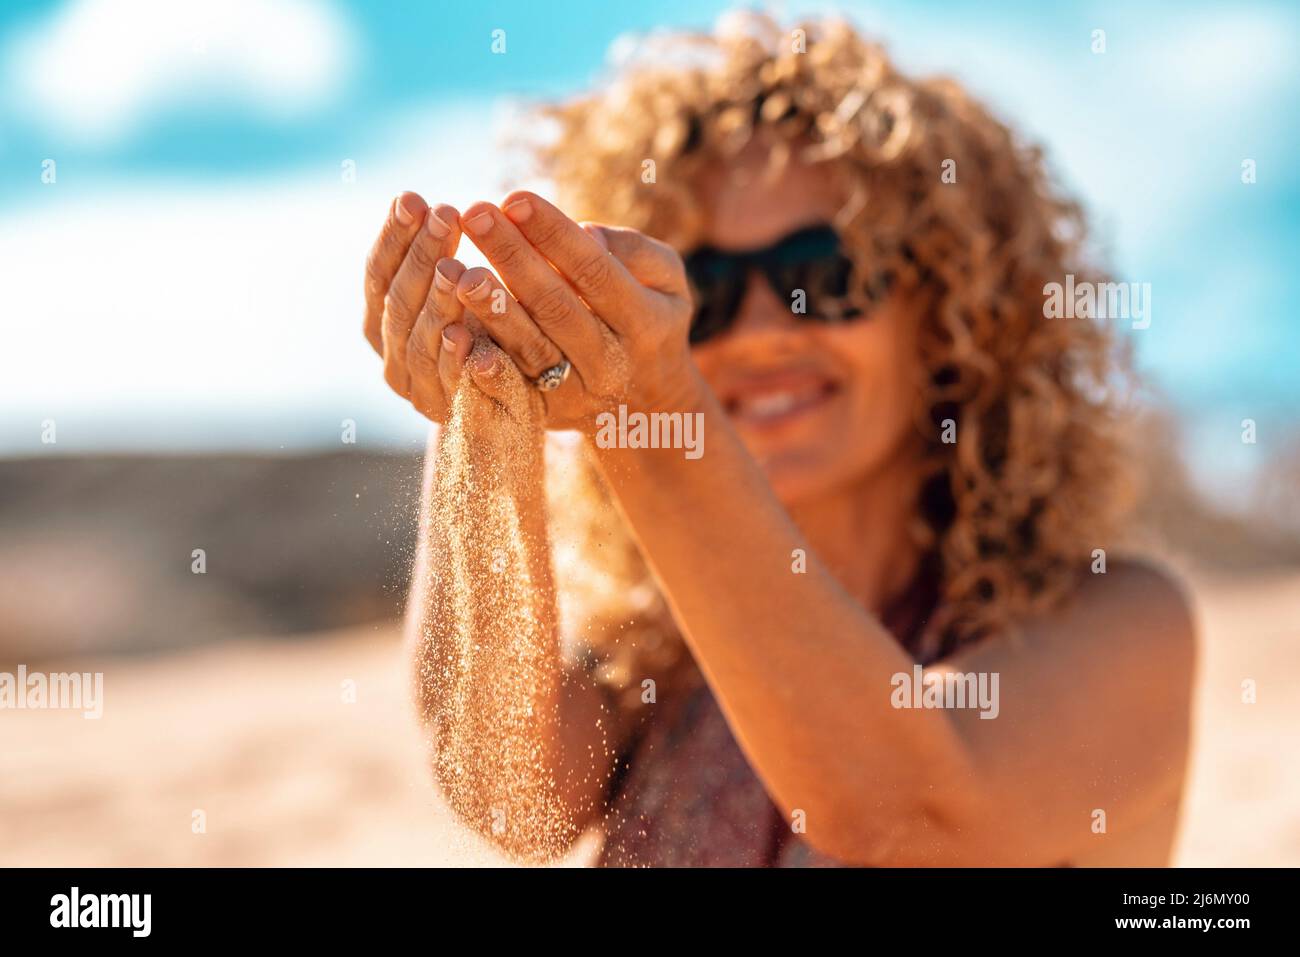 Summer holiday vacation travel woman lifestyle in outdoor leisure activity playing with the sand at the beach. Focus on hands and sand going down. Stock Photo